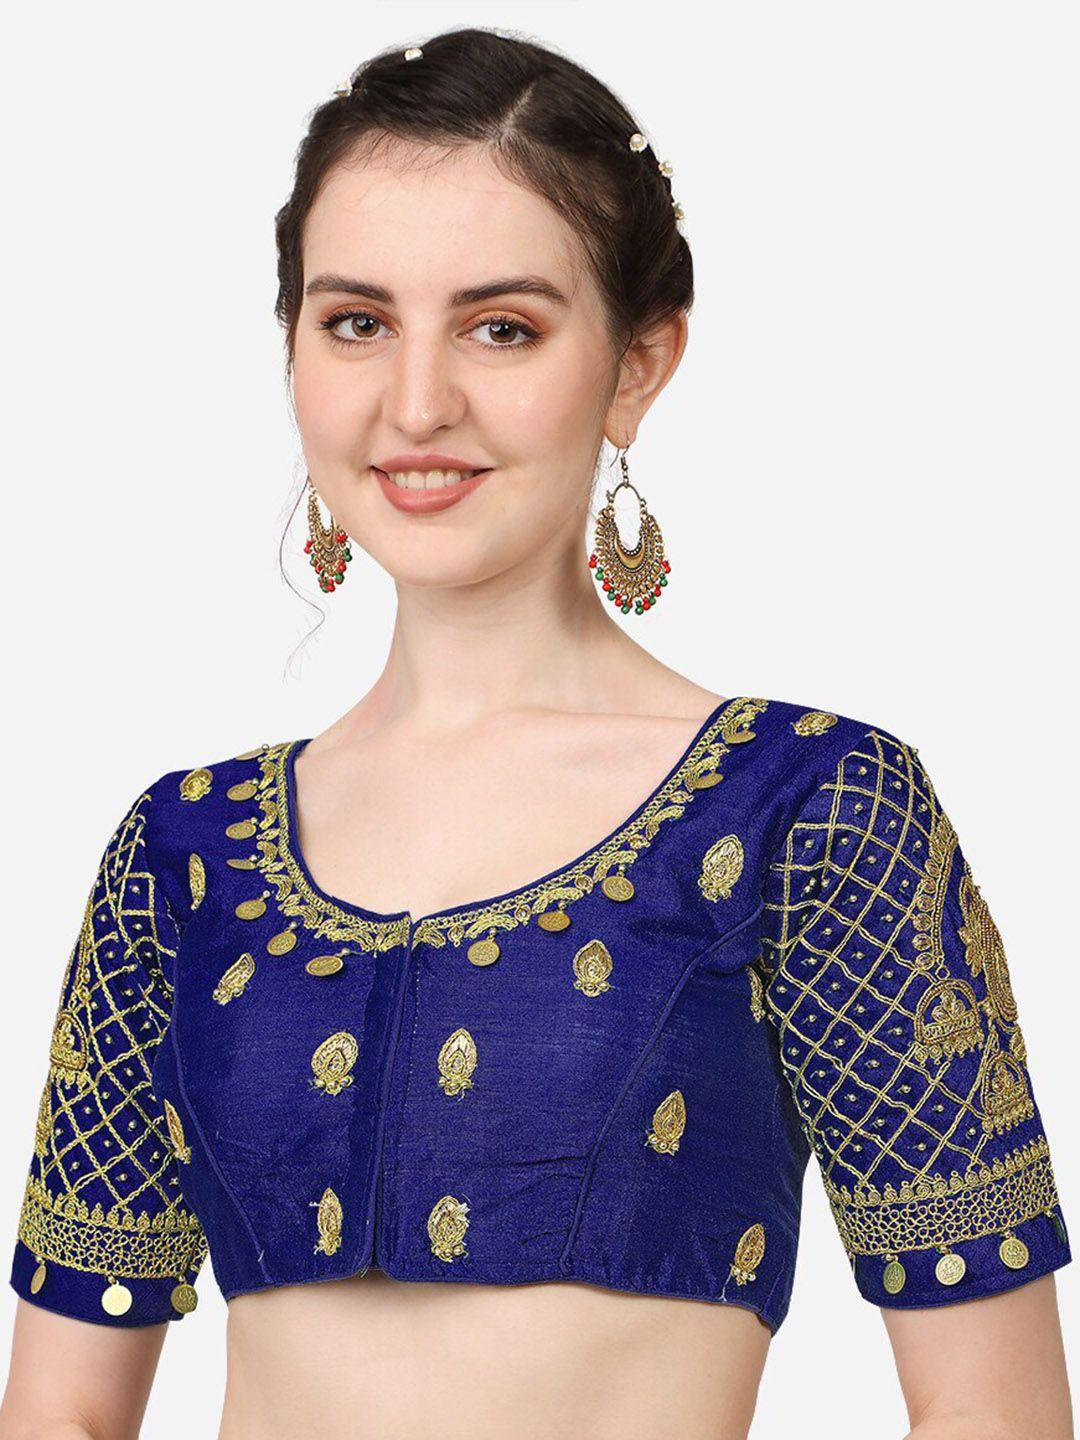 pujia mills women navy blue & gold embroidered saree blouse